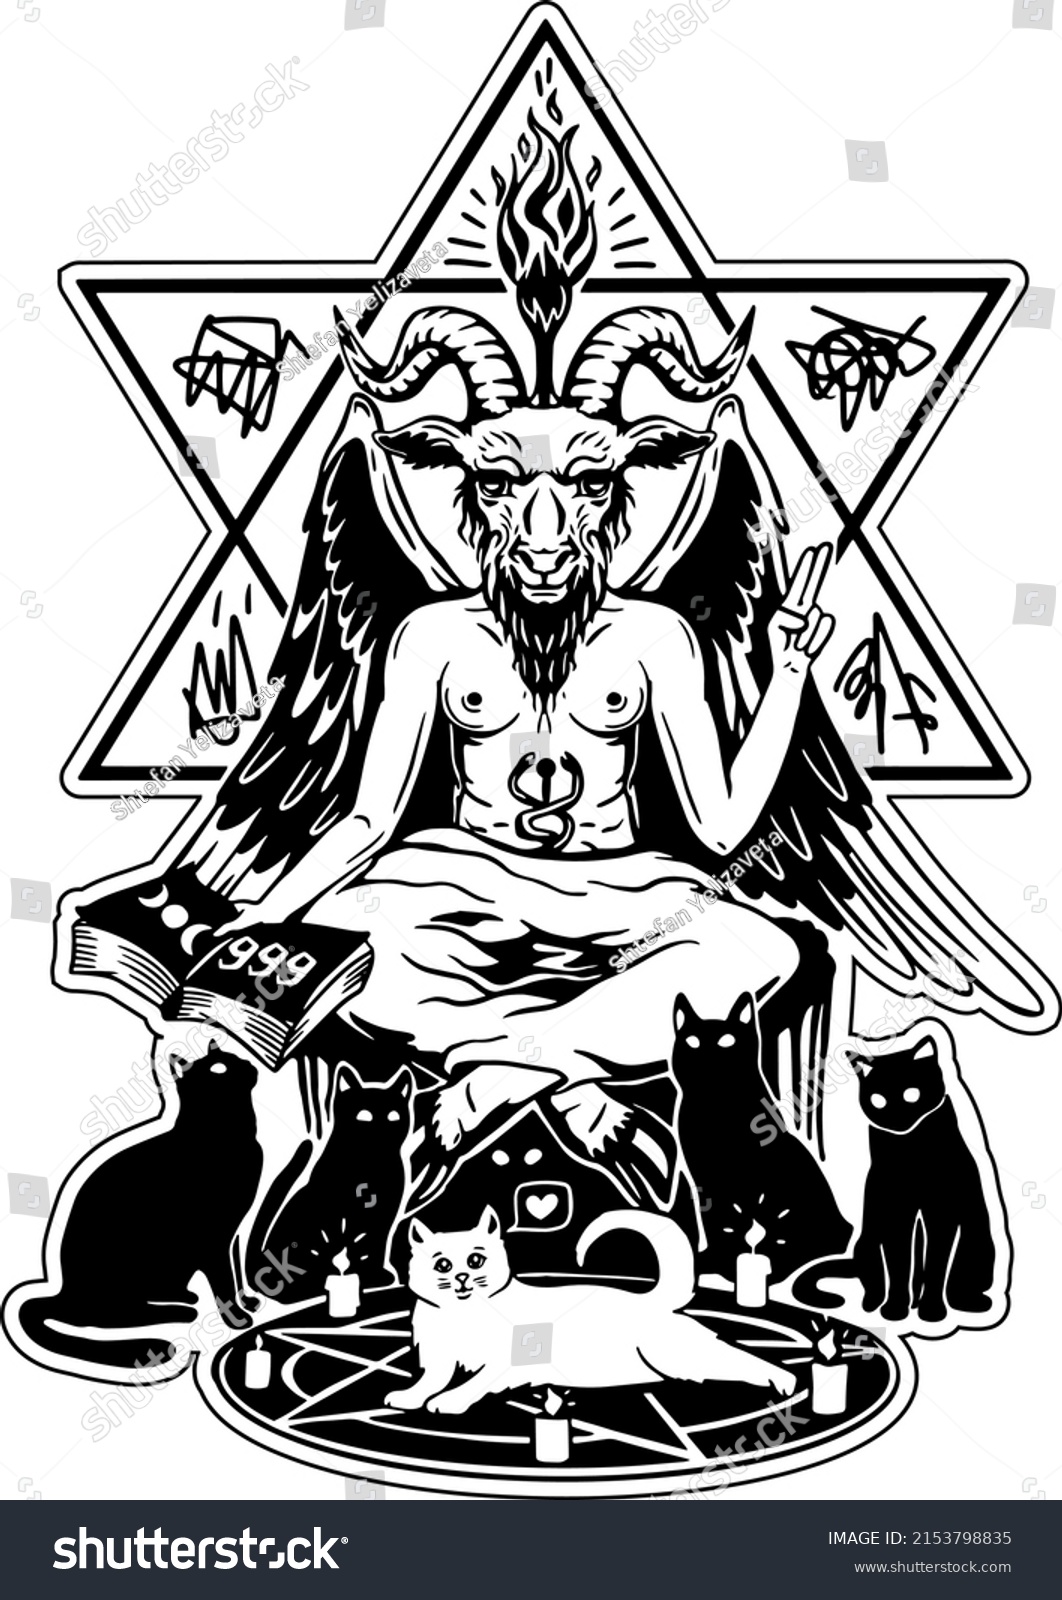 SVG of 
Baphomet. Vector illustration in engraving technique of demon with goat head, wings and woman body.With black cats and a white cat in the middle.Satanic, occult symbol. Isolated on white background.
 svg